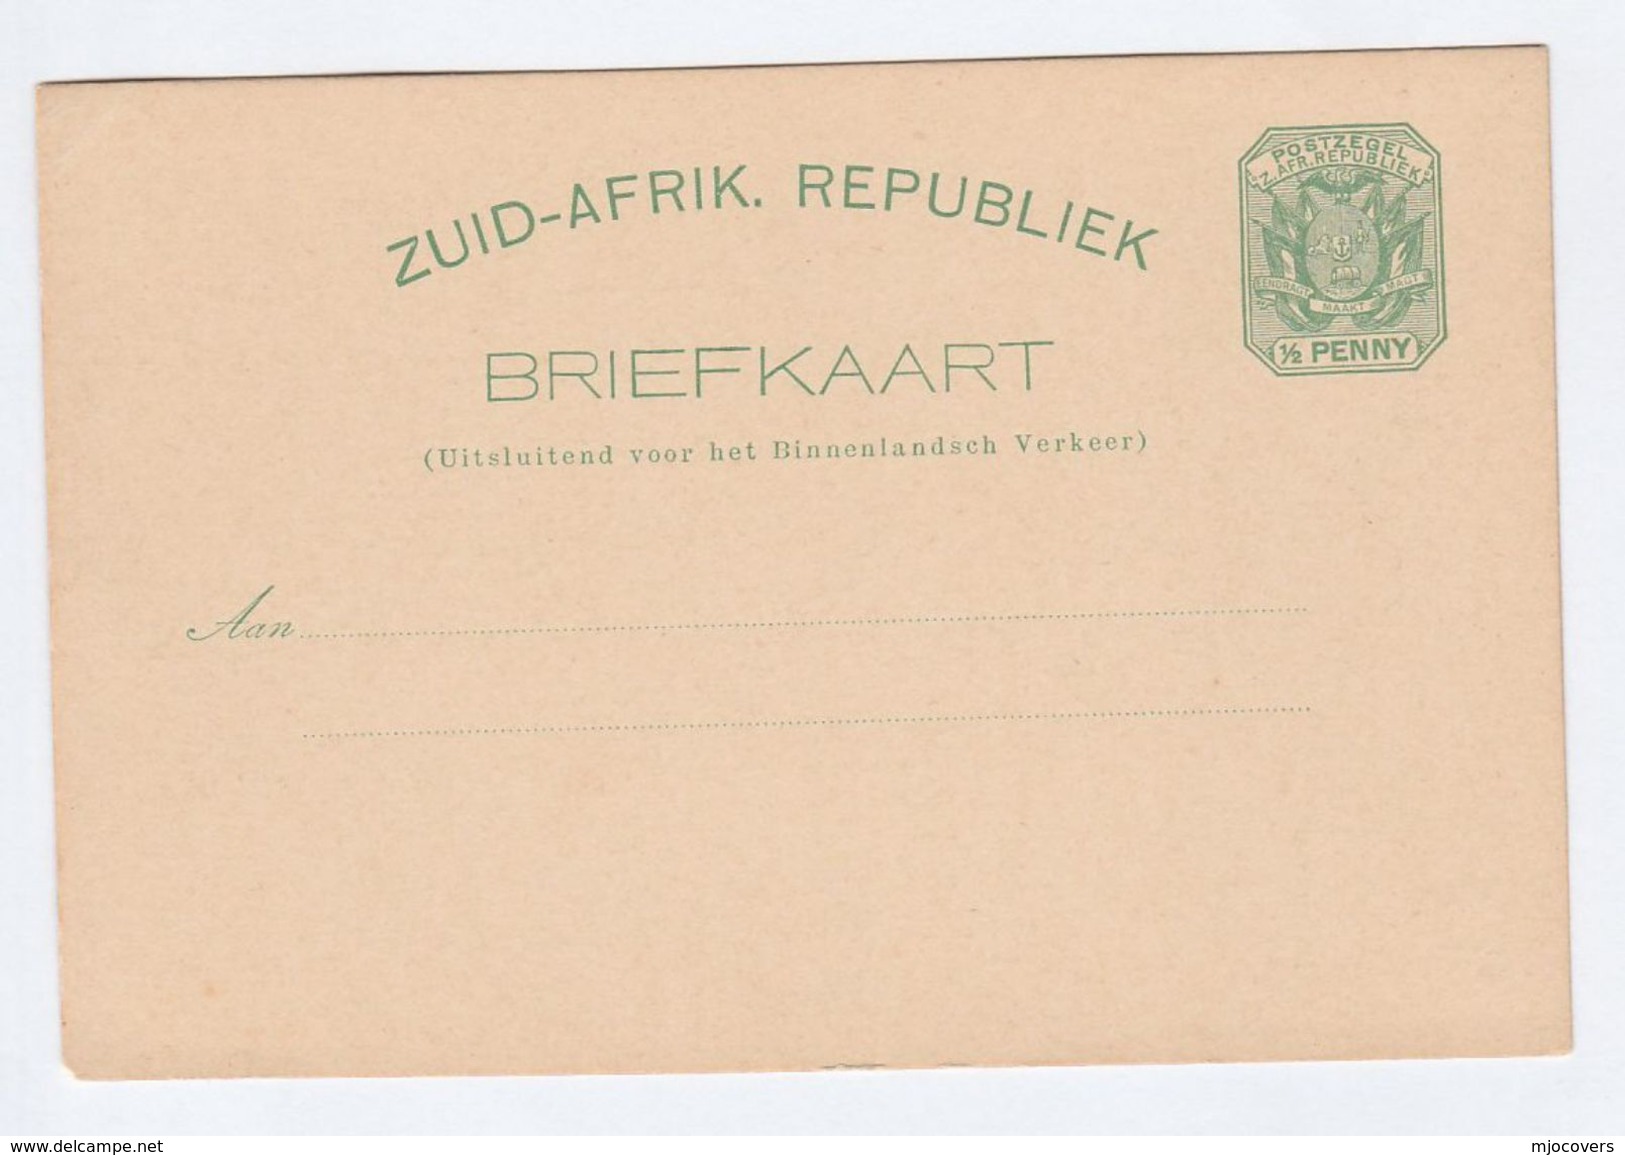 Old Transvaal Zuid Afrika Republiek POSTAL STATIONERY CARD Cover Stamps South Africa - Transvaal (1870-1909)